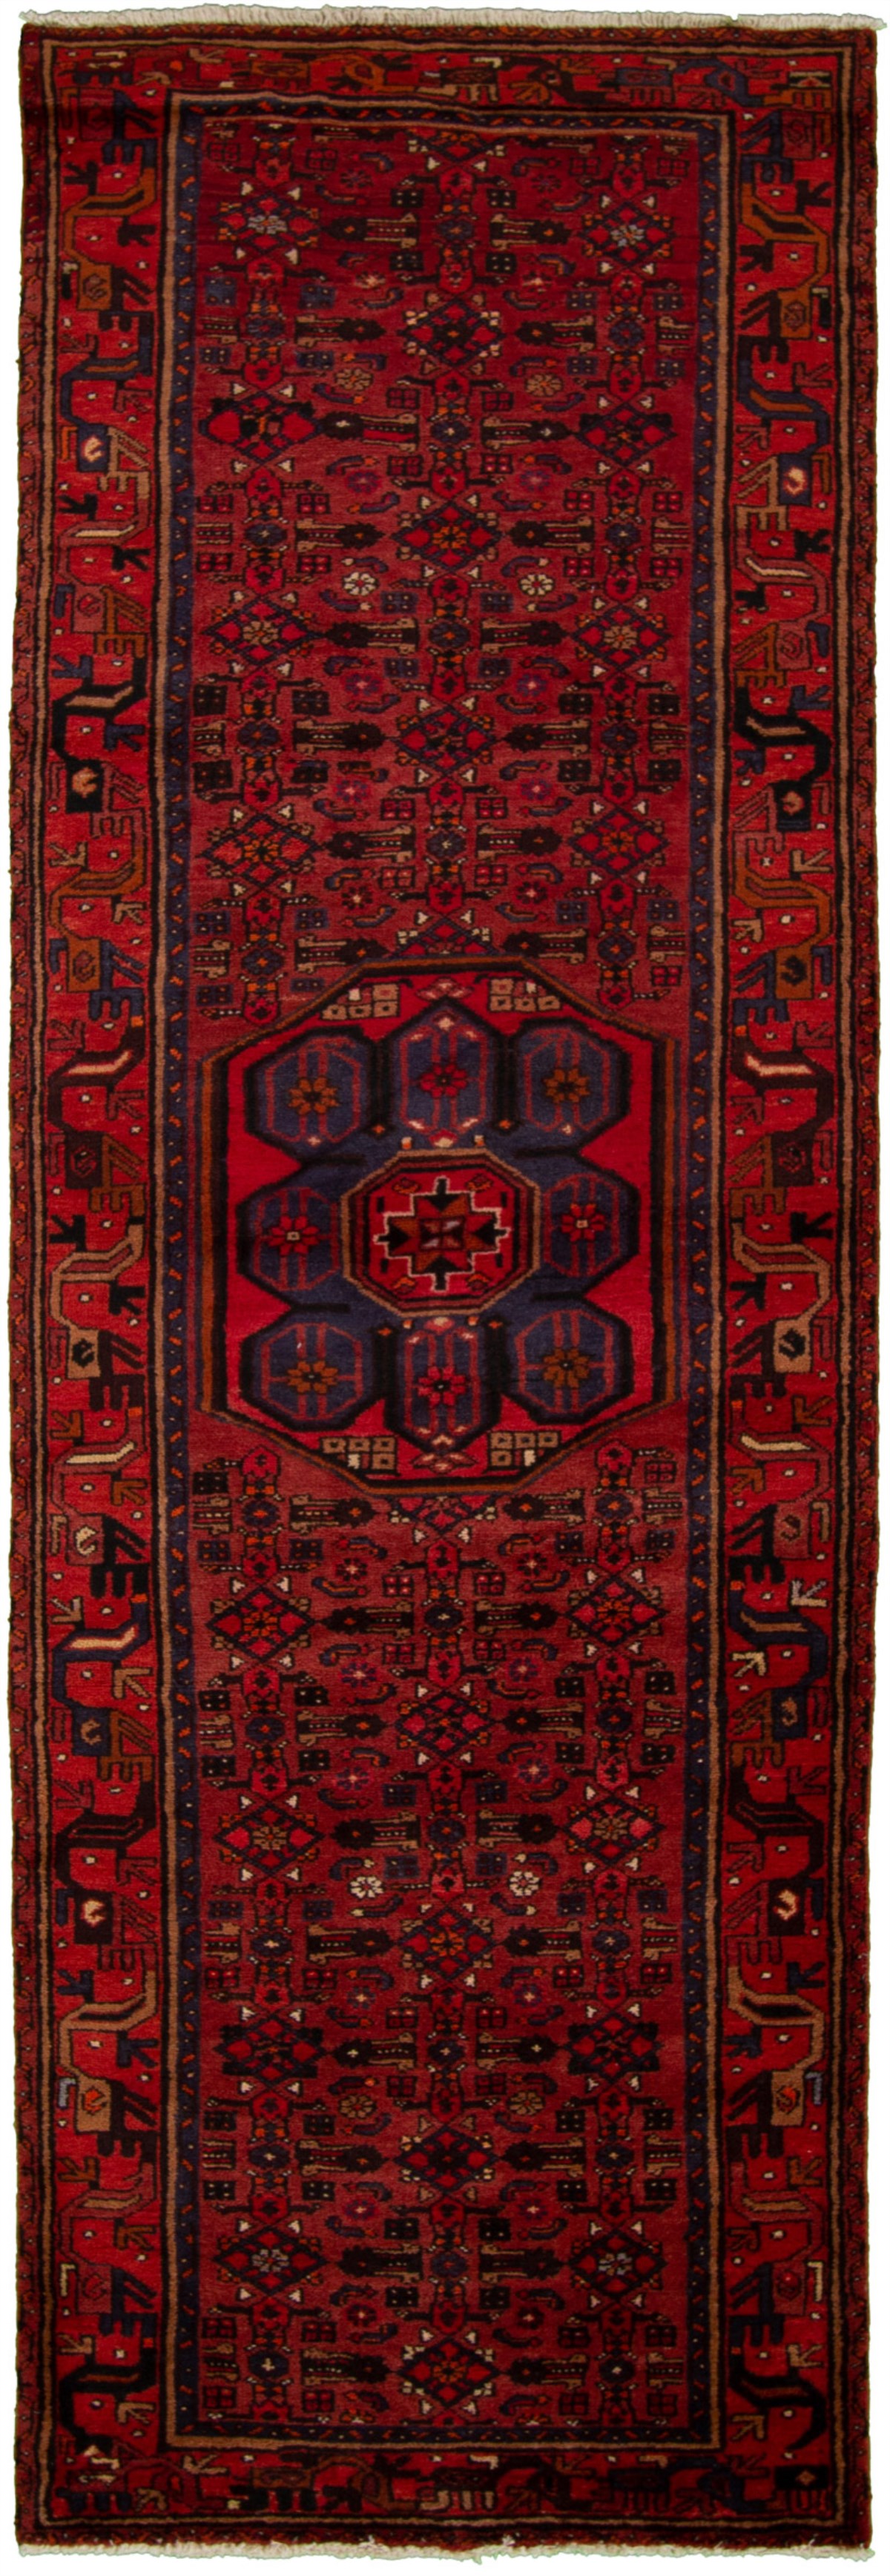 Hand-knotted Hamadan Red Wool Rug 3'2" x 9'10"  Size: 3'2" x 9'10"  